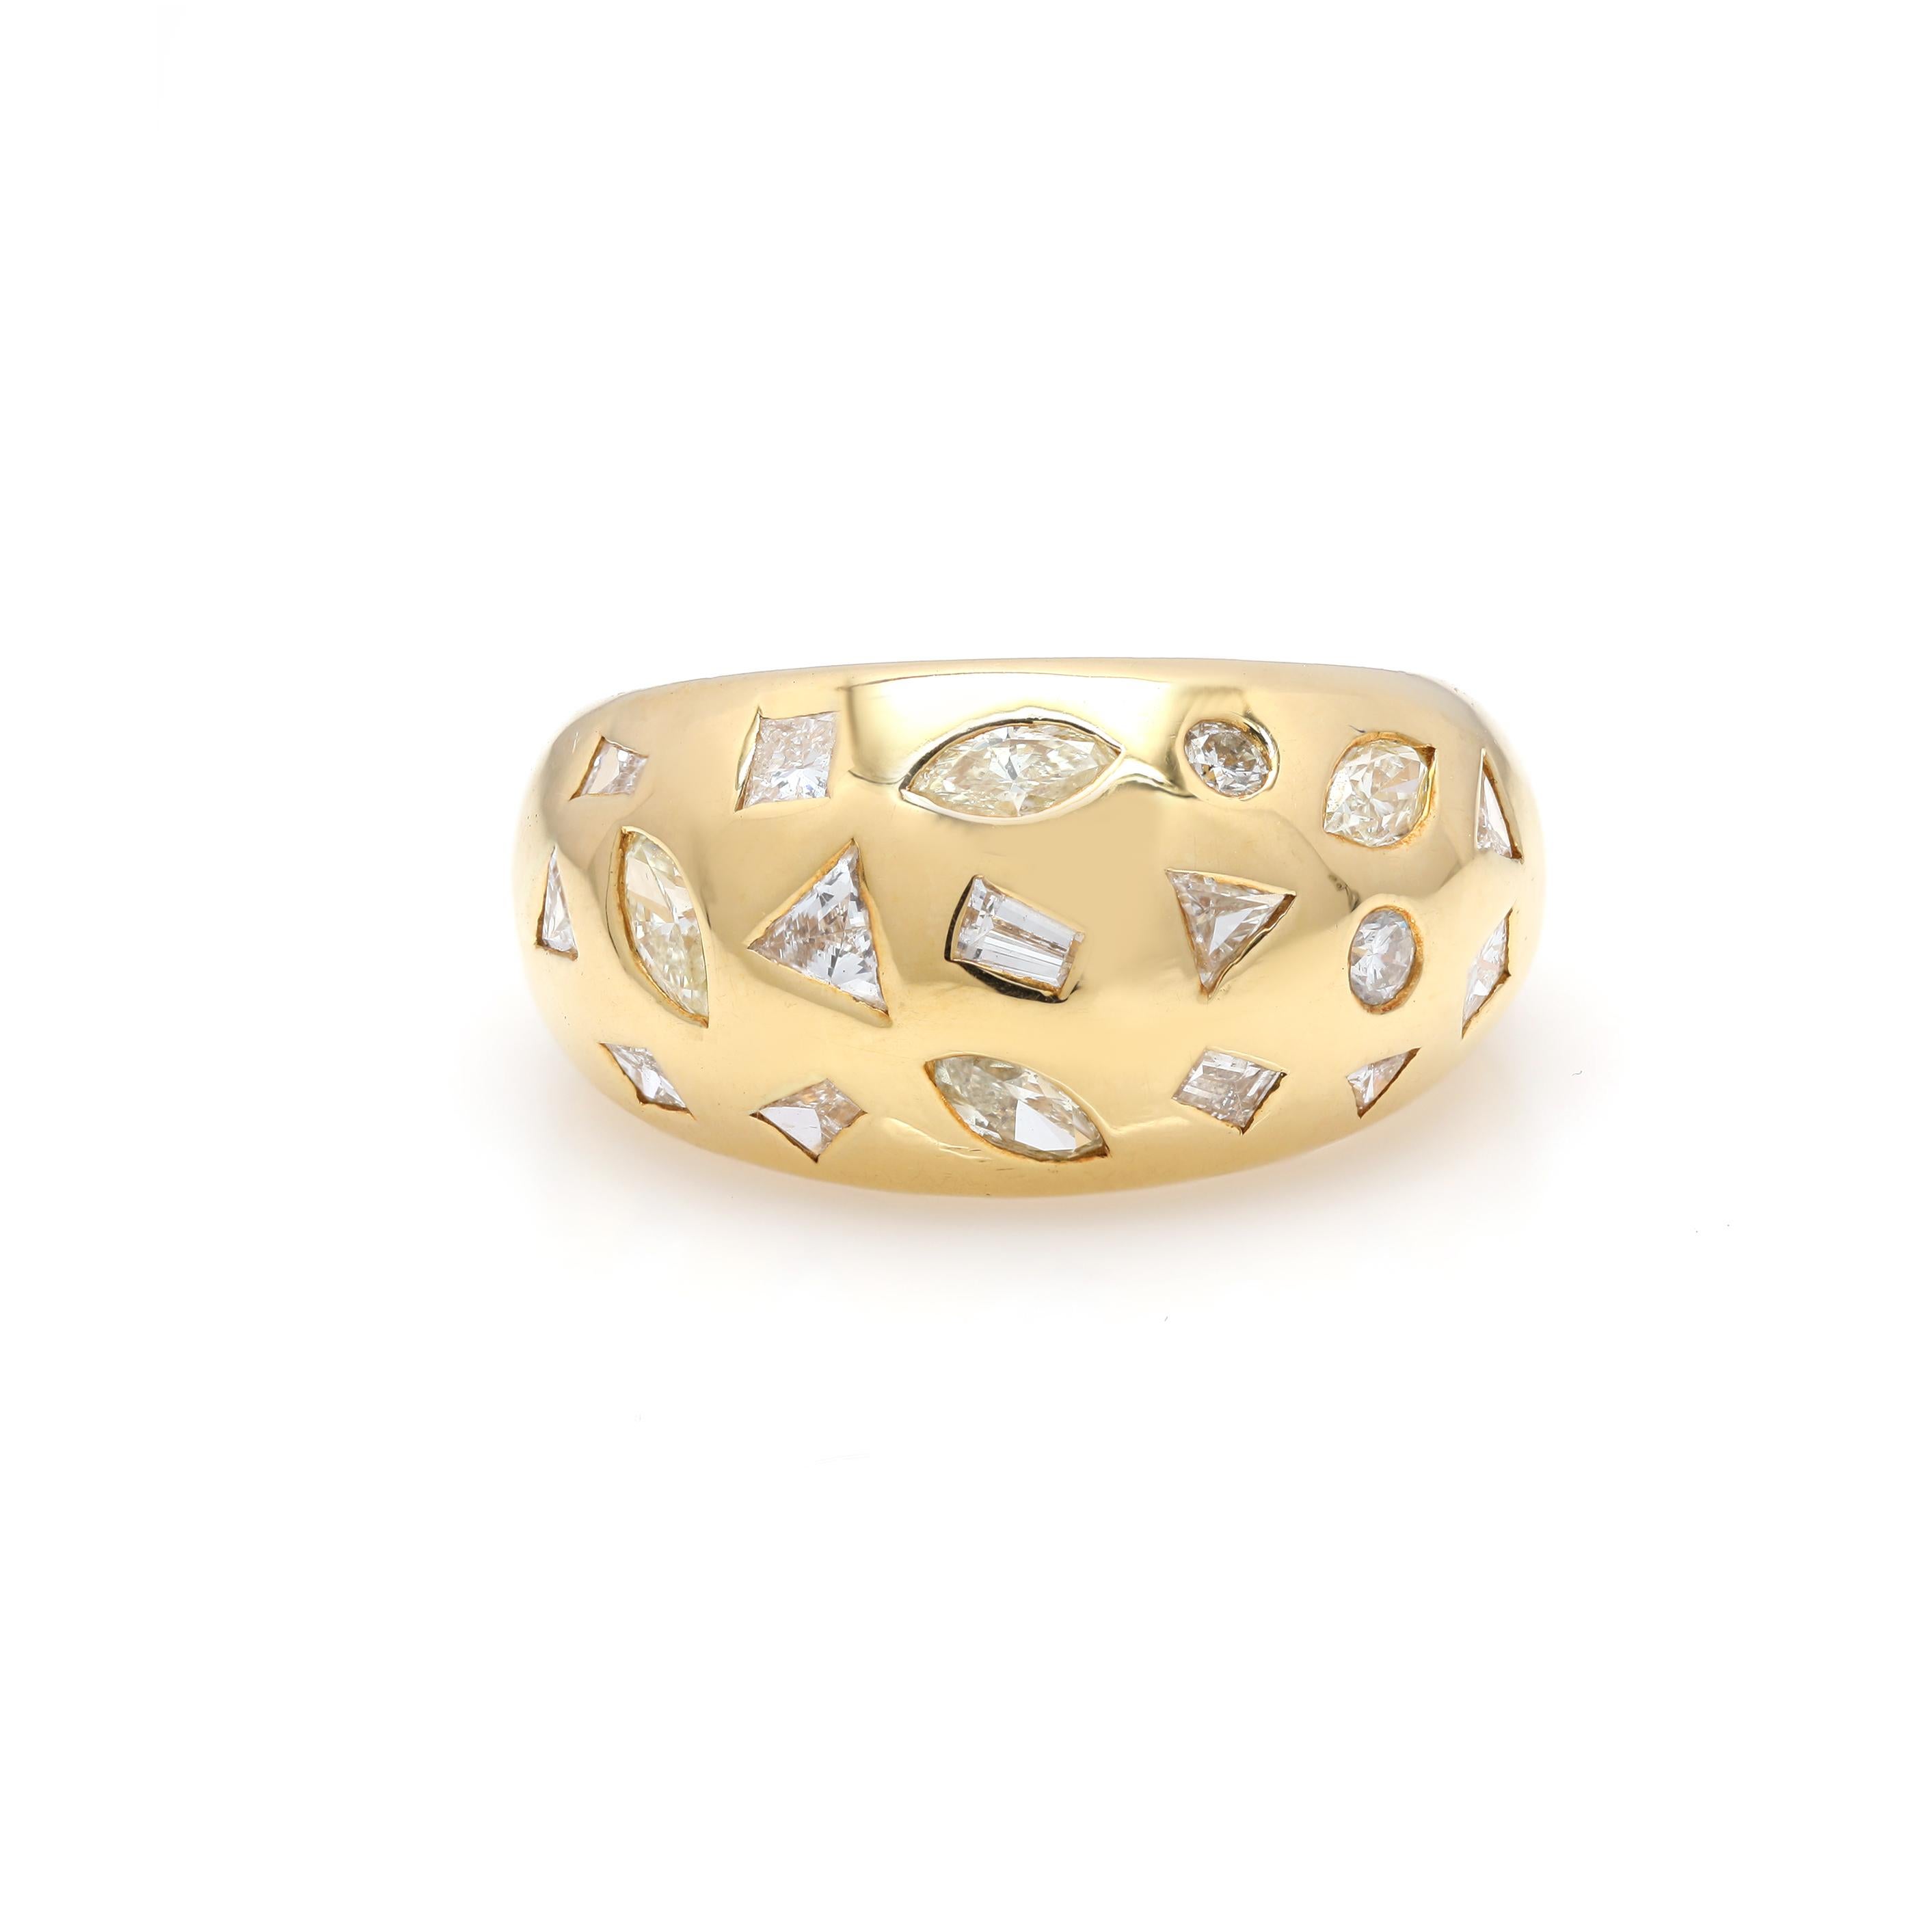 For Sale:  Genuine Diamond Celestial Dome Ring in Solid 18K Yellow Gold for Him 3